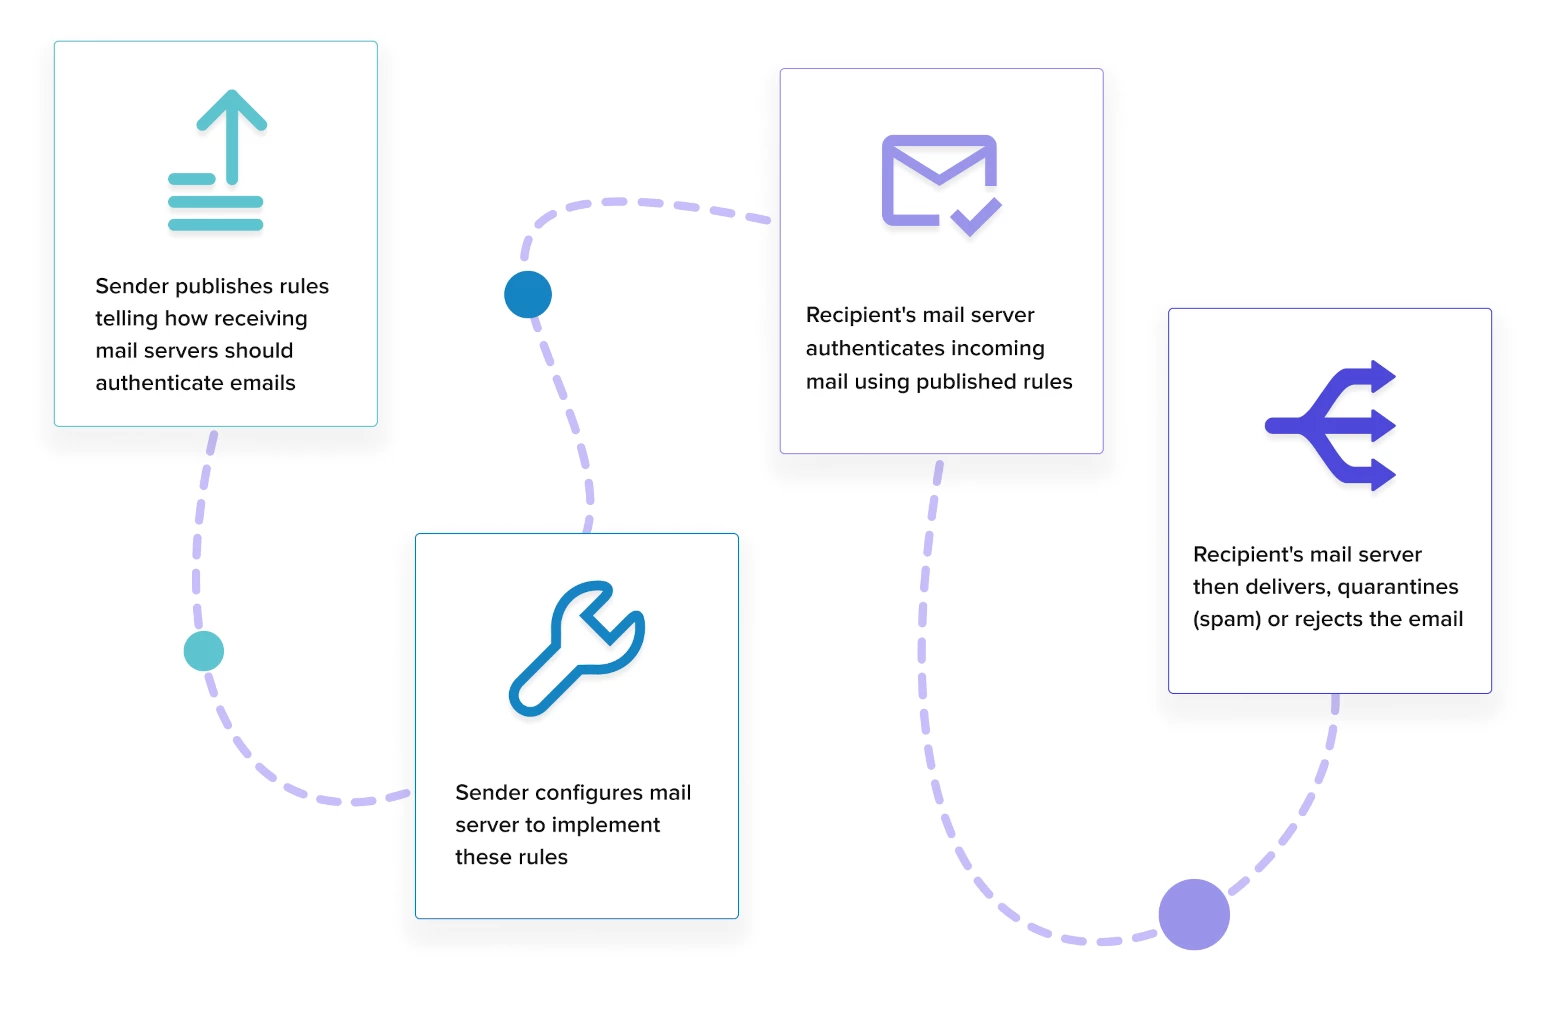 General email authentication process